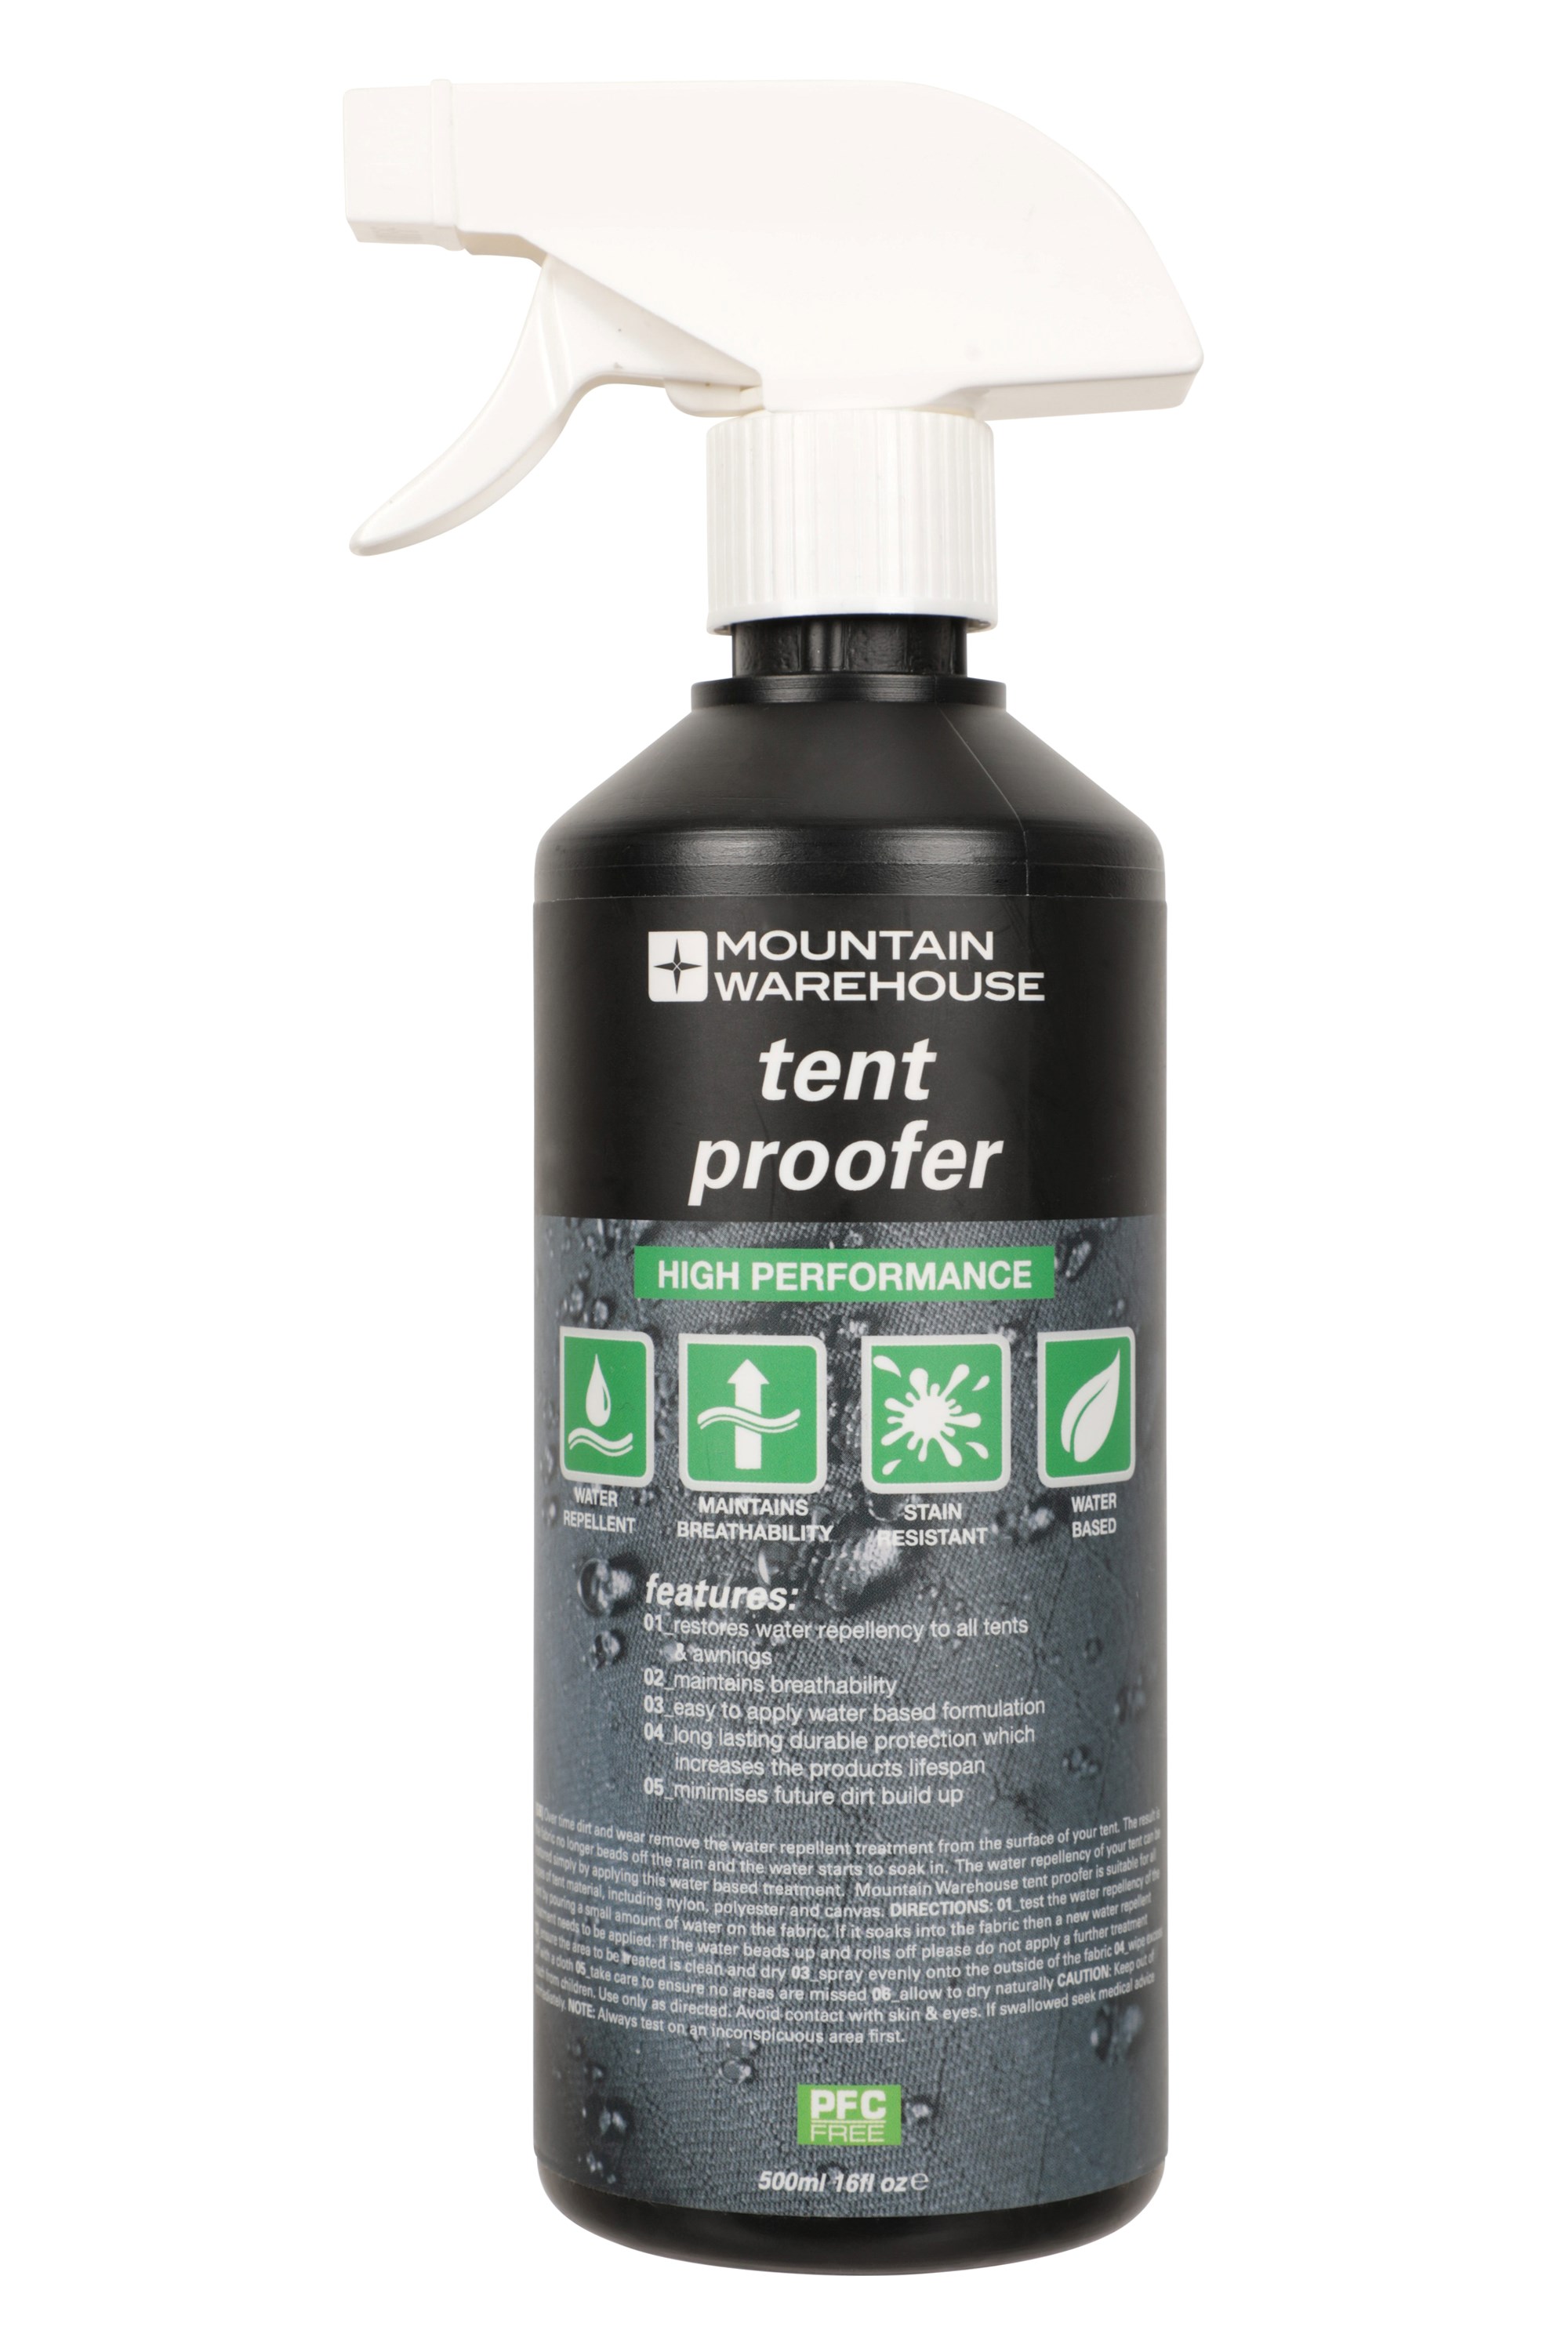 Pedag Waterproofer, German Made, Heavy Duty Waterproof and Stain Repellent, Canvas & Fabric Spray Protector, Waterproofing Spray and Guard for  Boots, Shoes, Tents, Hats, Jackets, 5.7 OZ